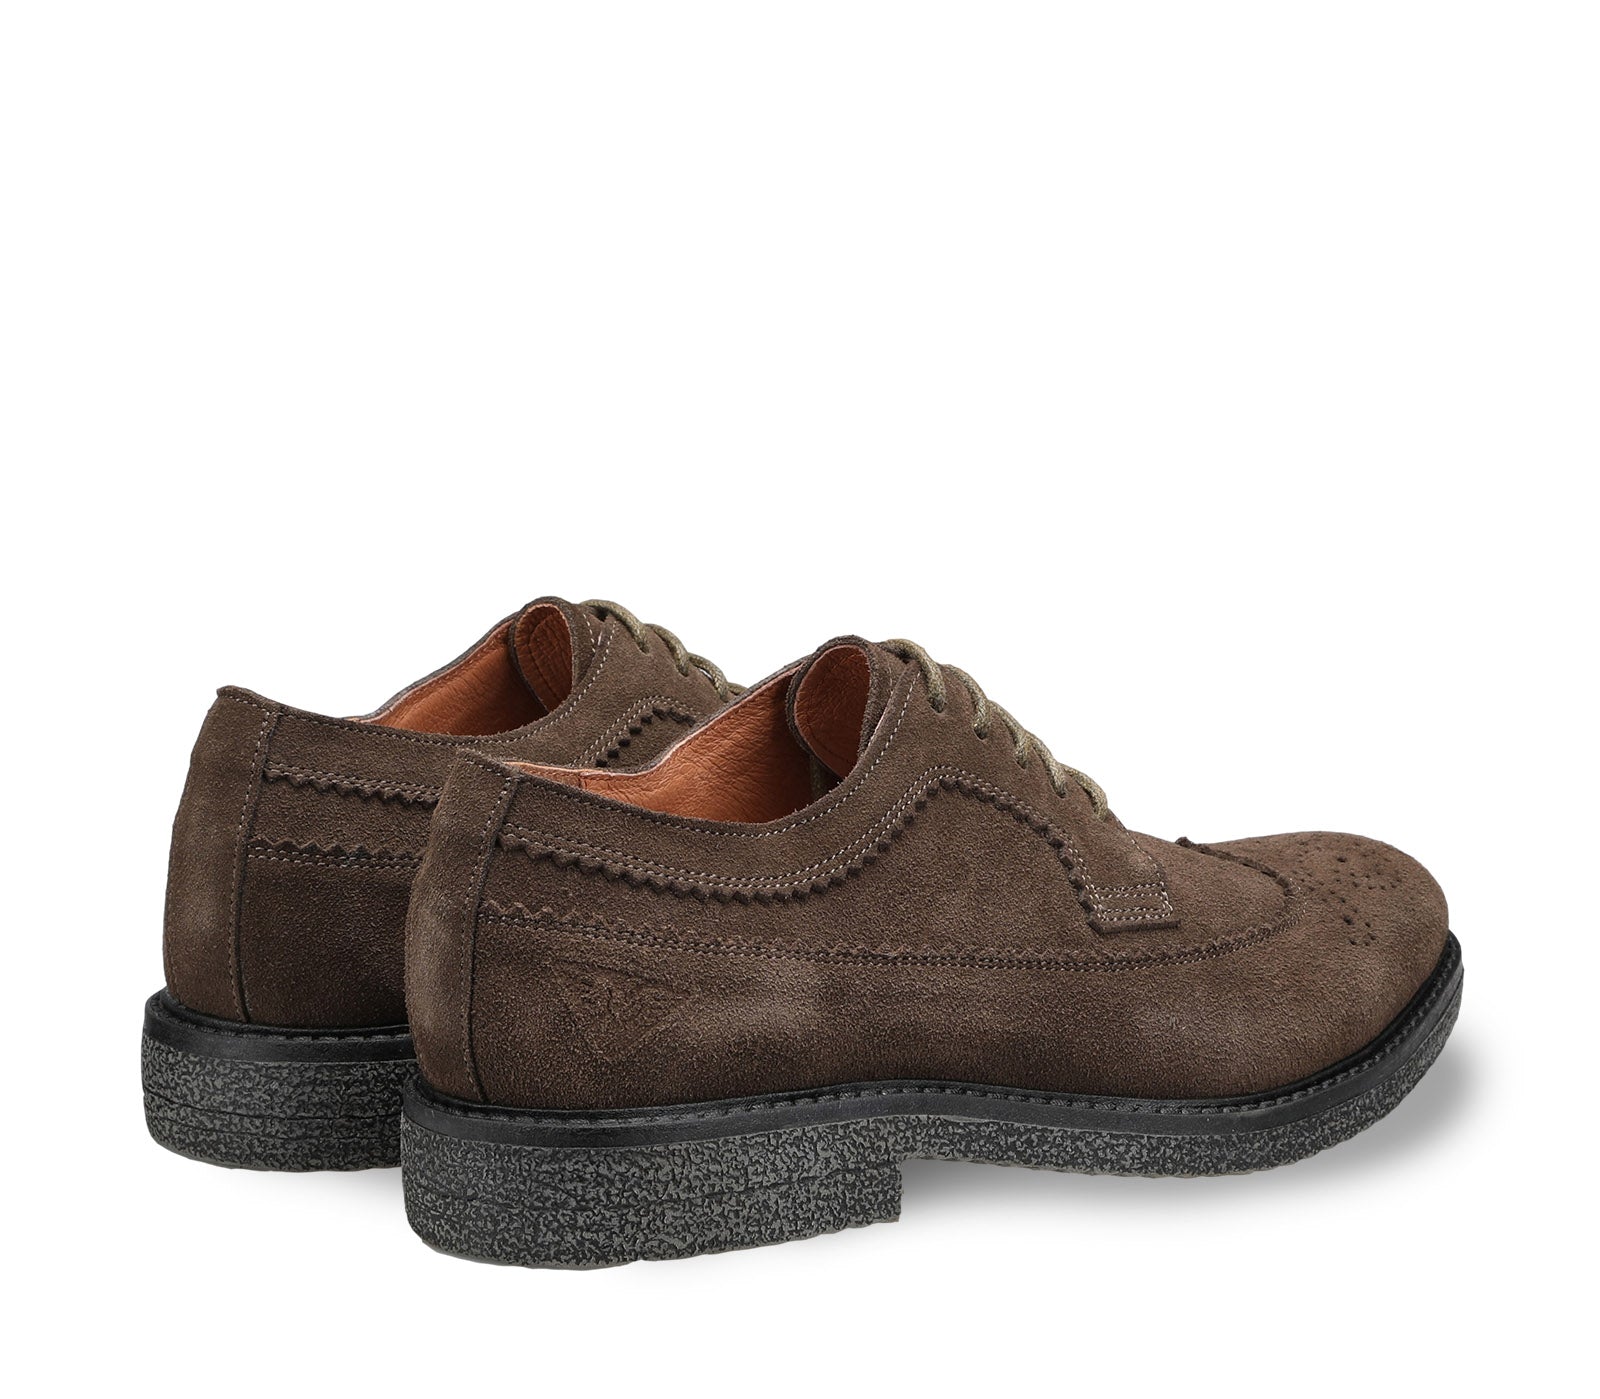 Suede Laced Shoes For Men